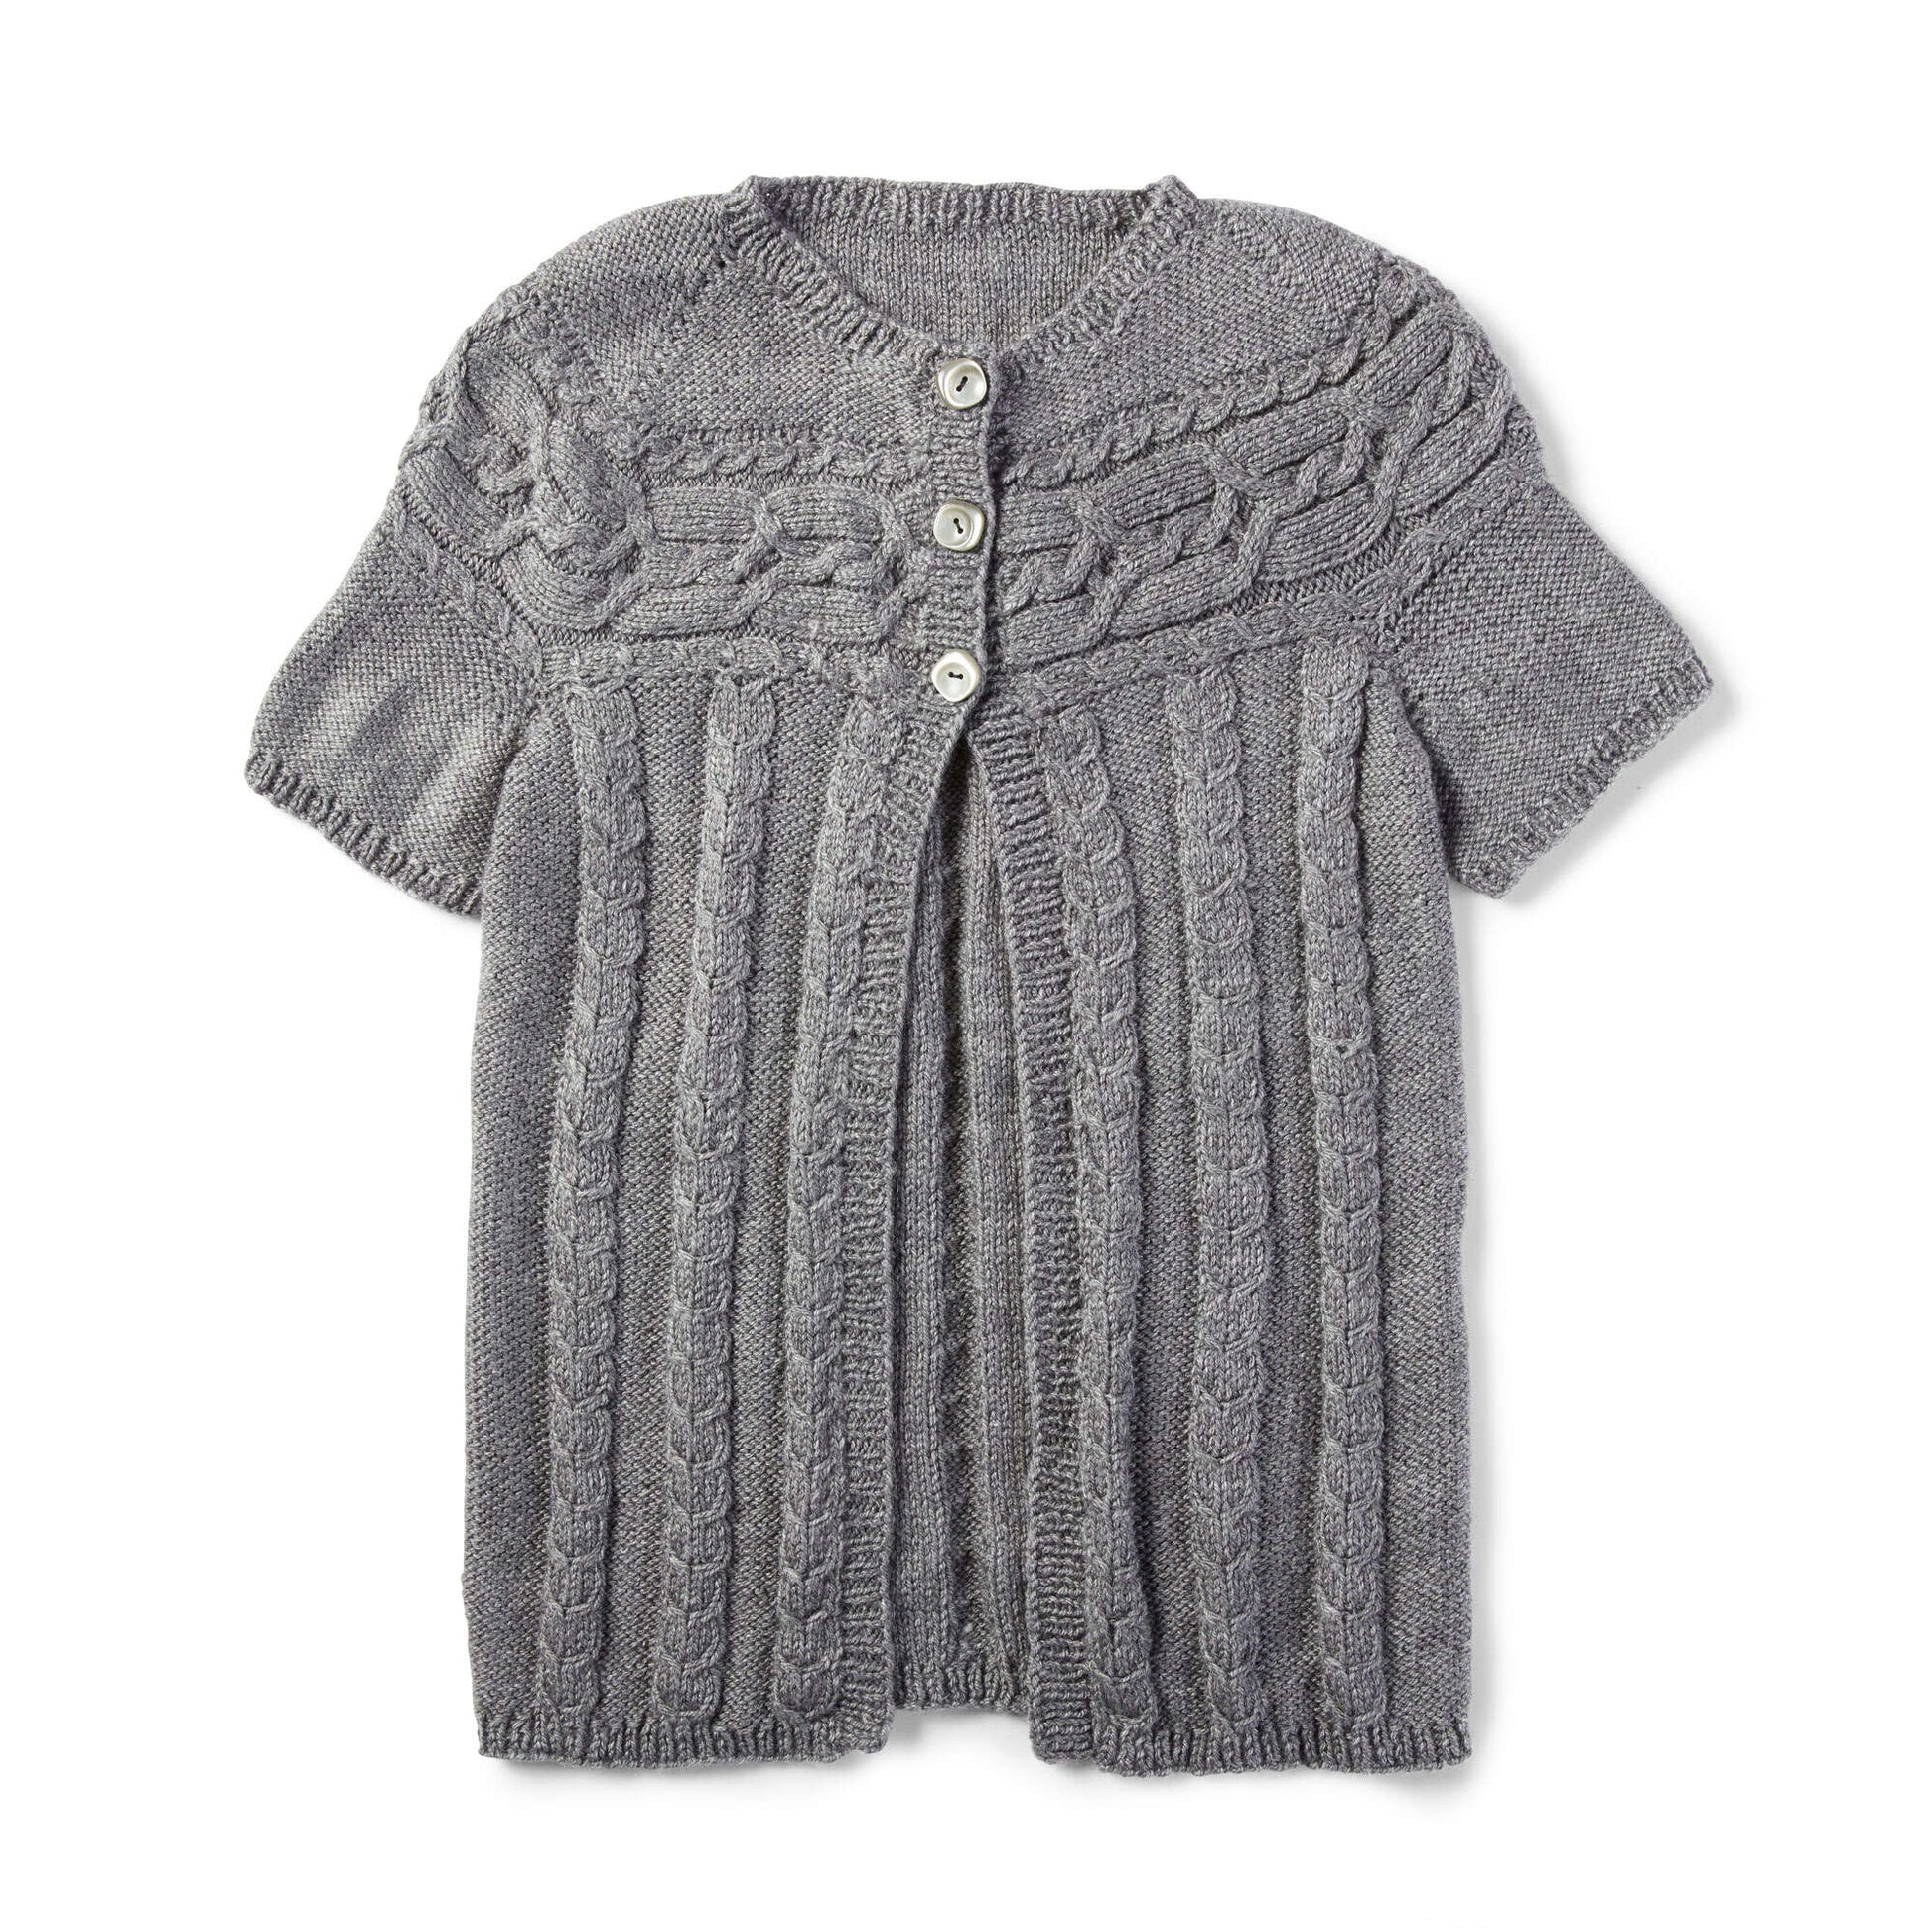 Free Patons Knit Cardigan With Cabled Yoke Pattern